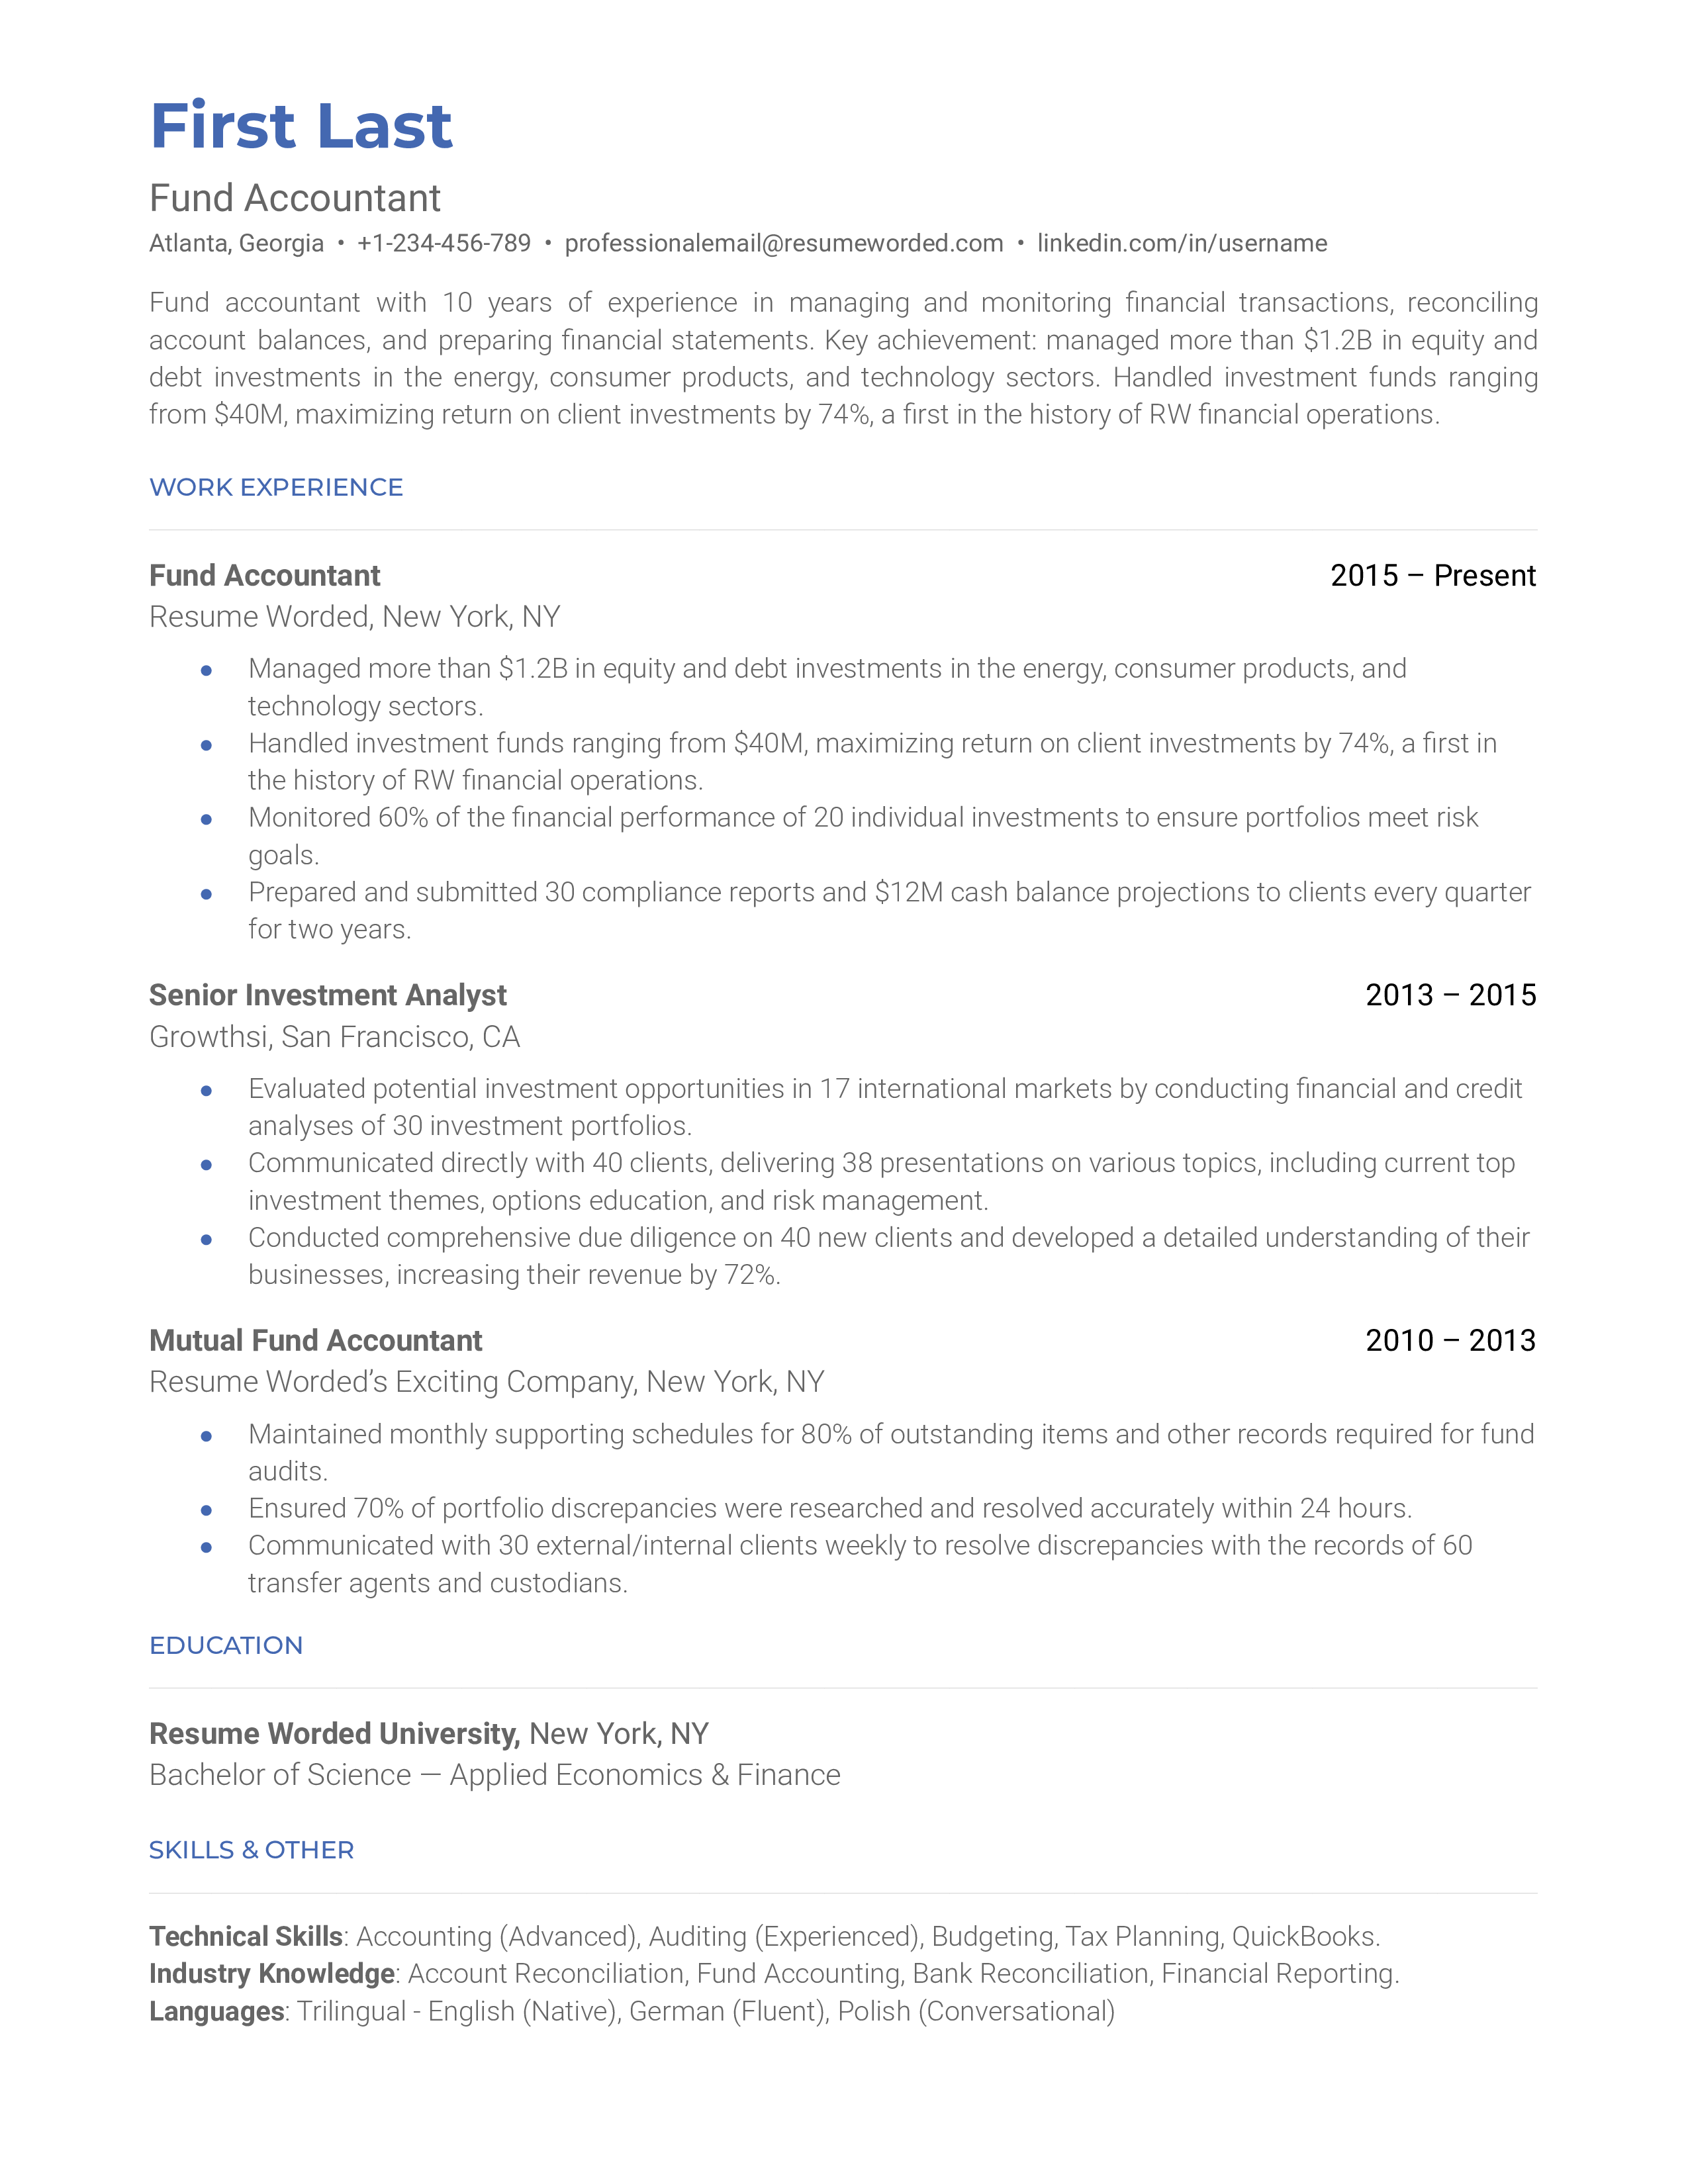  A fund accountant resume sample that highlights the applicant’s history in the financial sector and relevant skills acquired. 